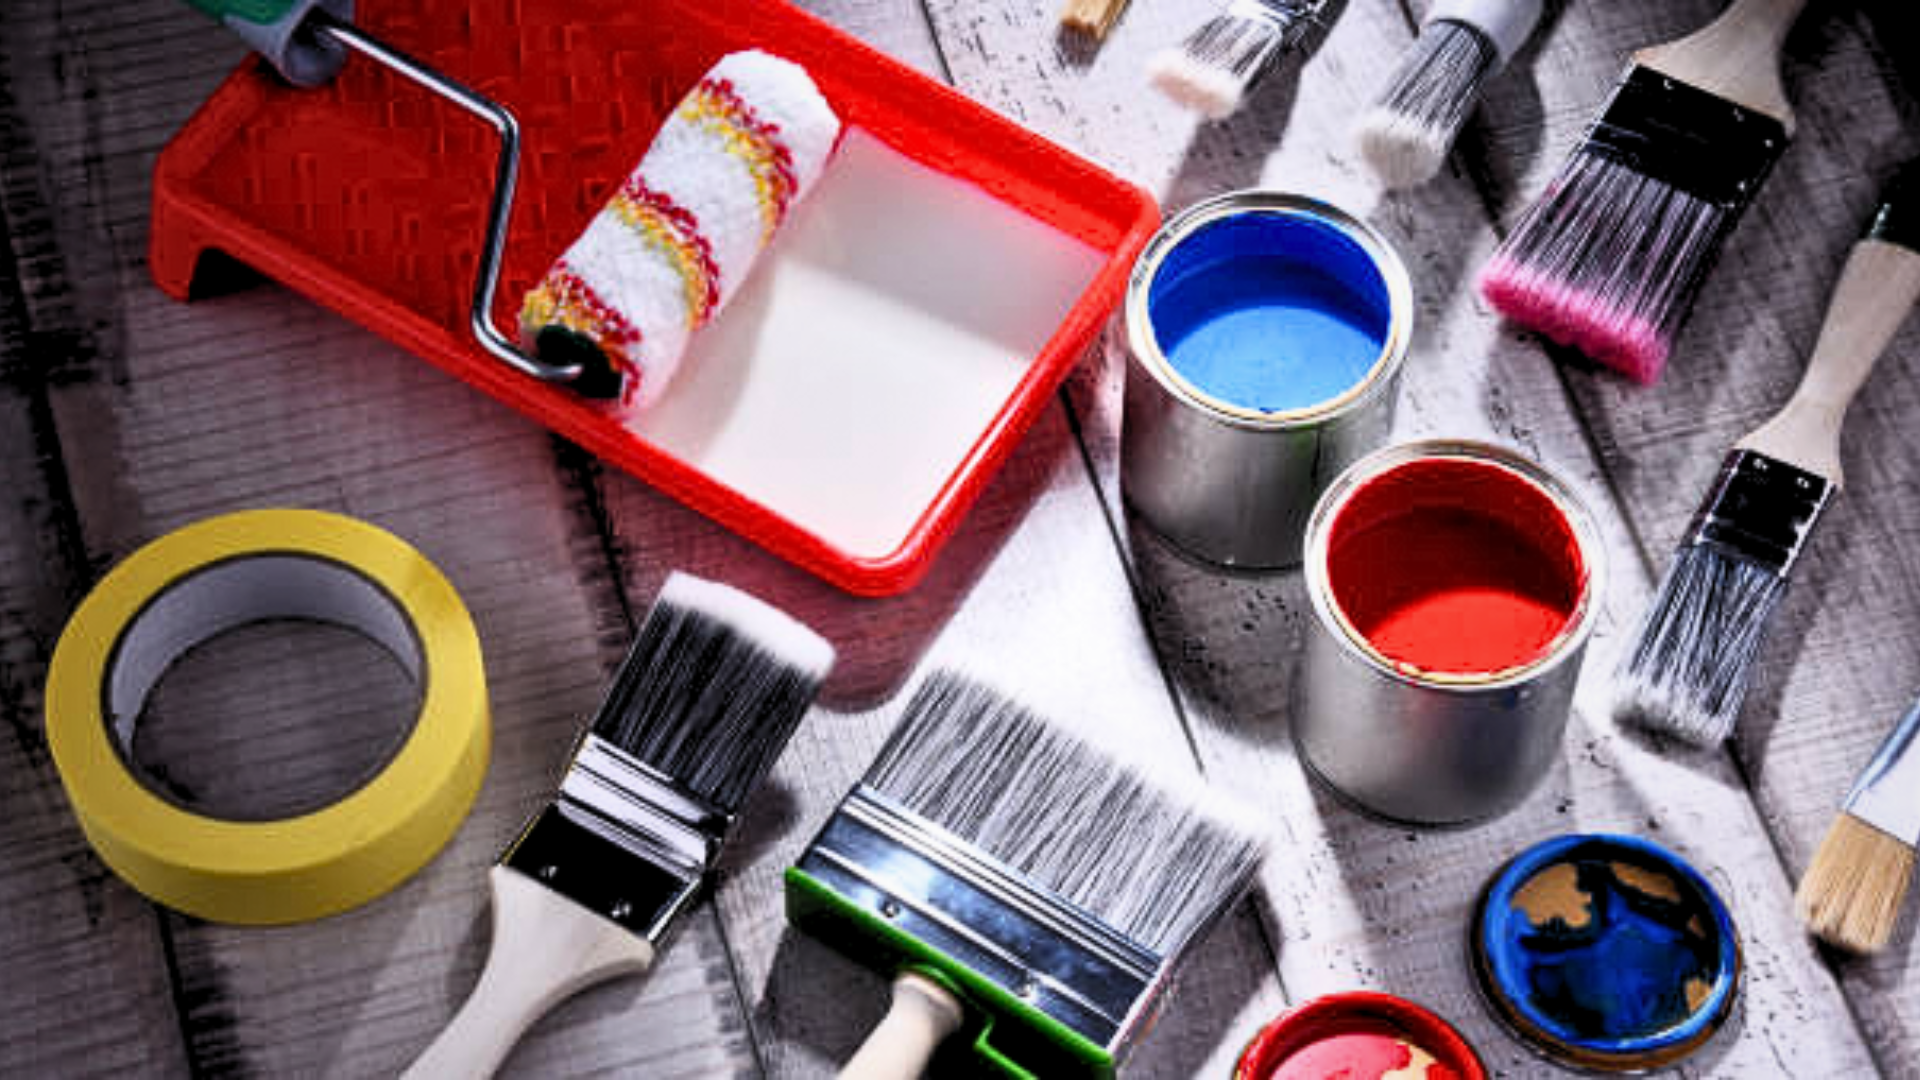 Types of Paint Brushes and Their Uses